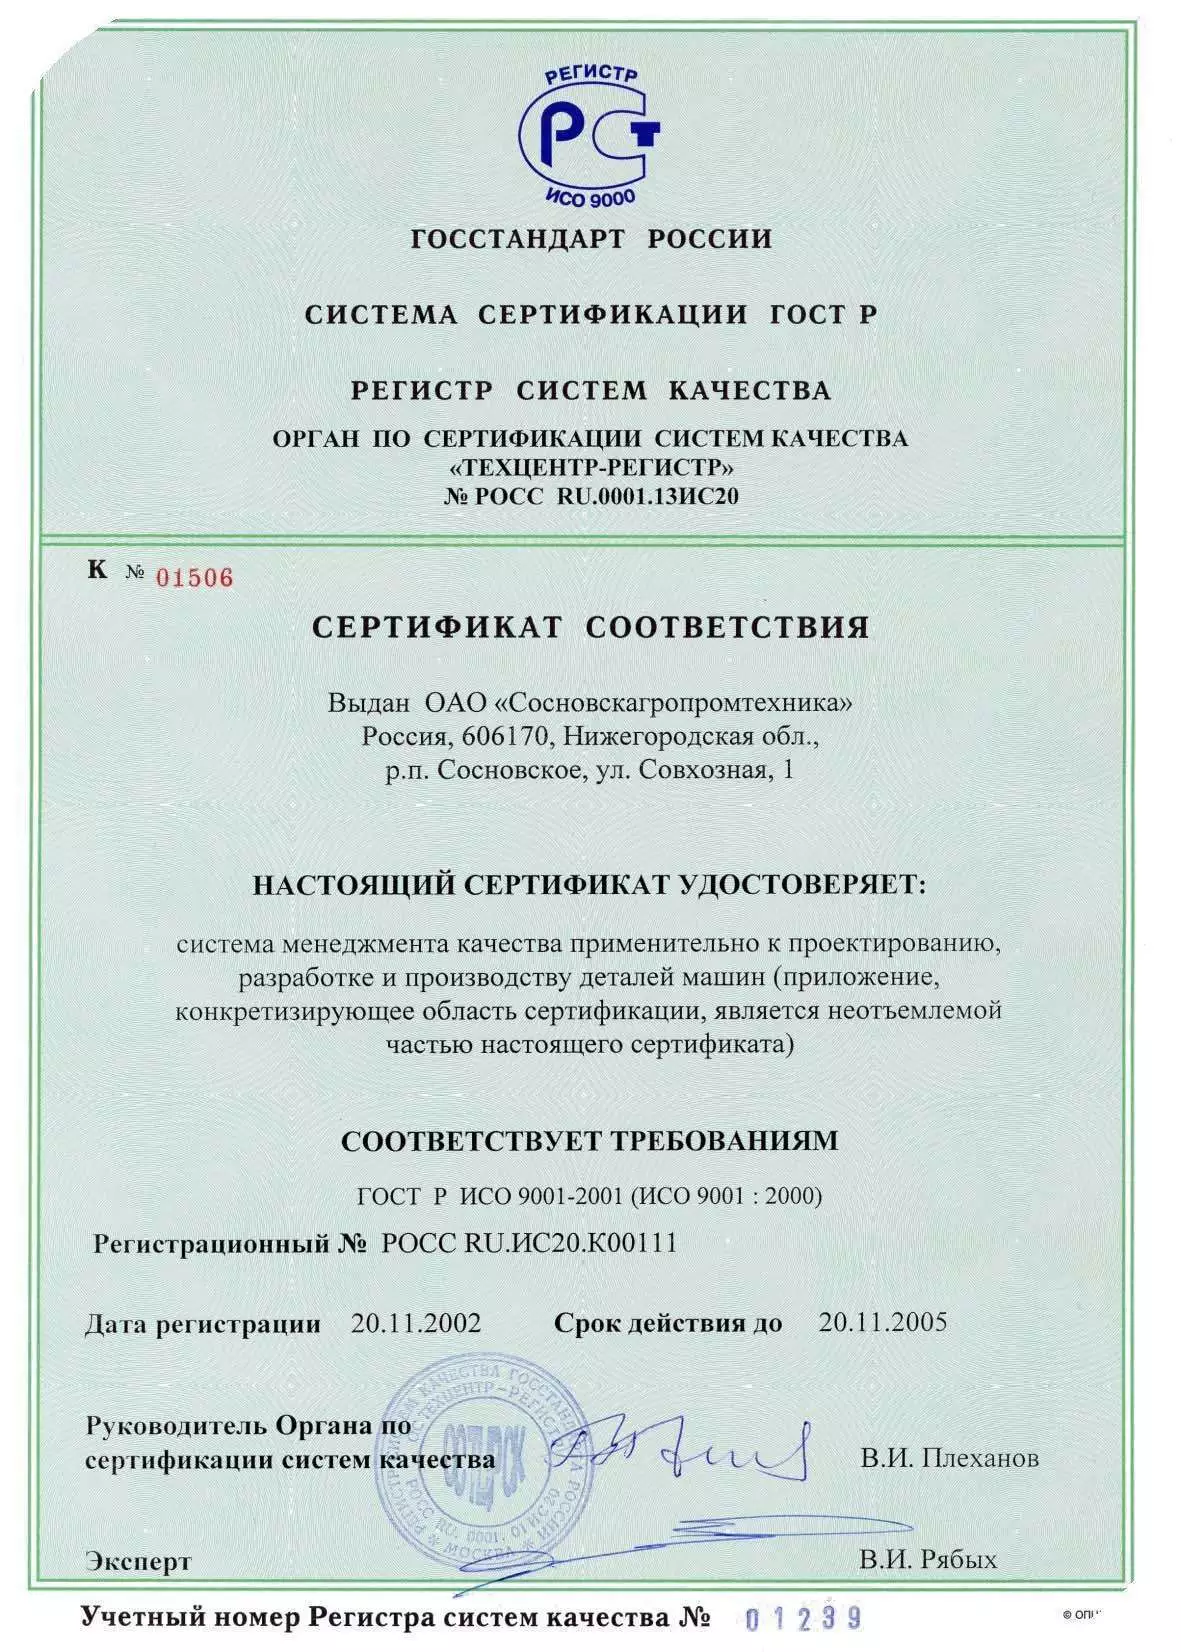 2002 год - QMS certification for compliance with the requirements of GOST R ISO 9001 ver. 2001 в АО Сосновскагропромтехника